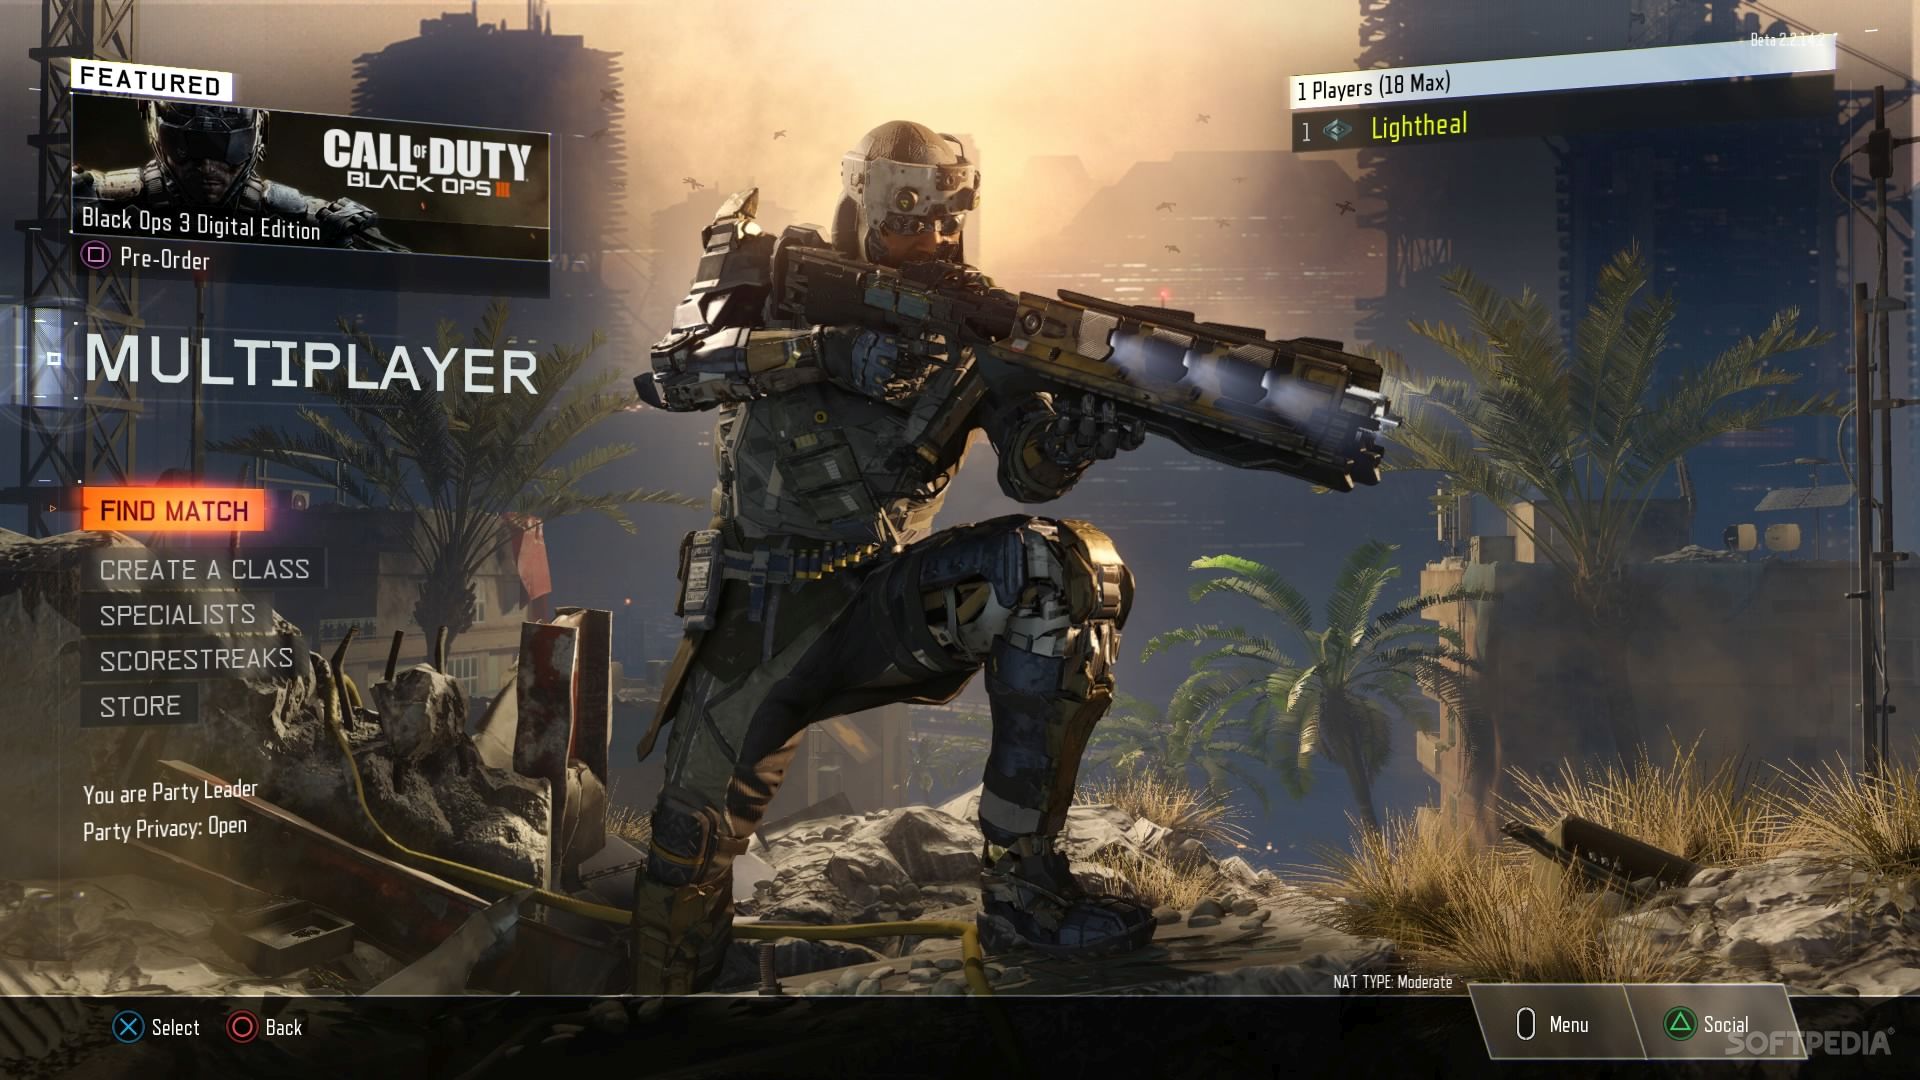 Call of Duty Black Ops 3 Xbox One Beta Code Issue Solved via